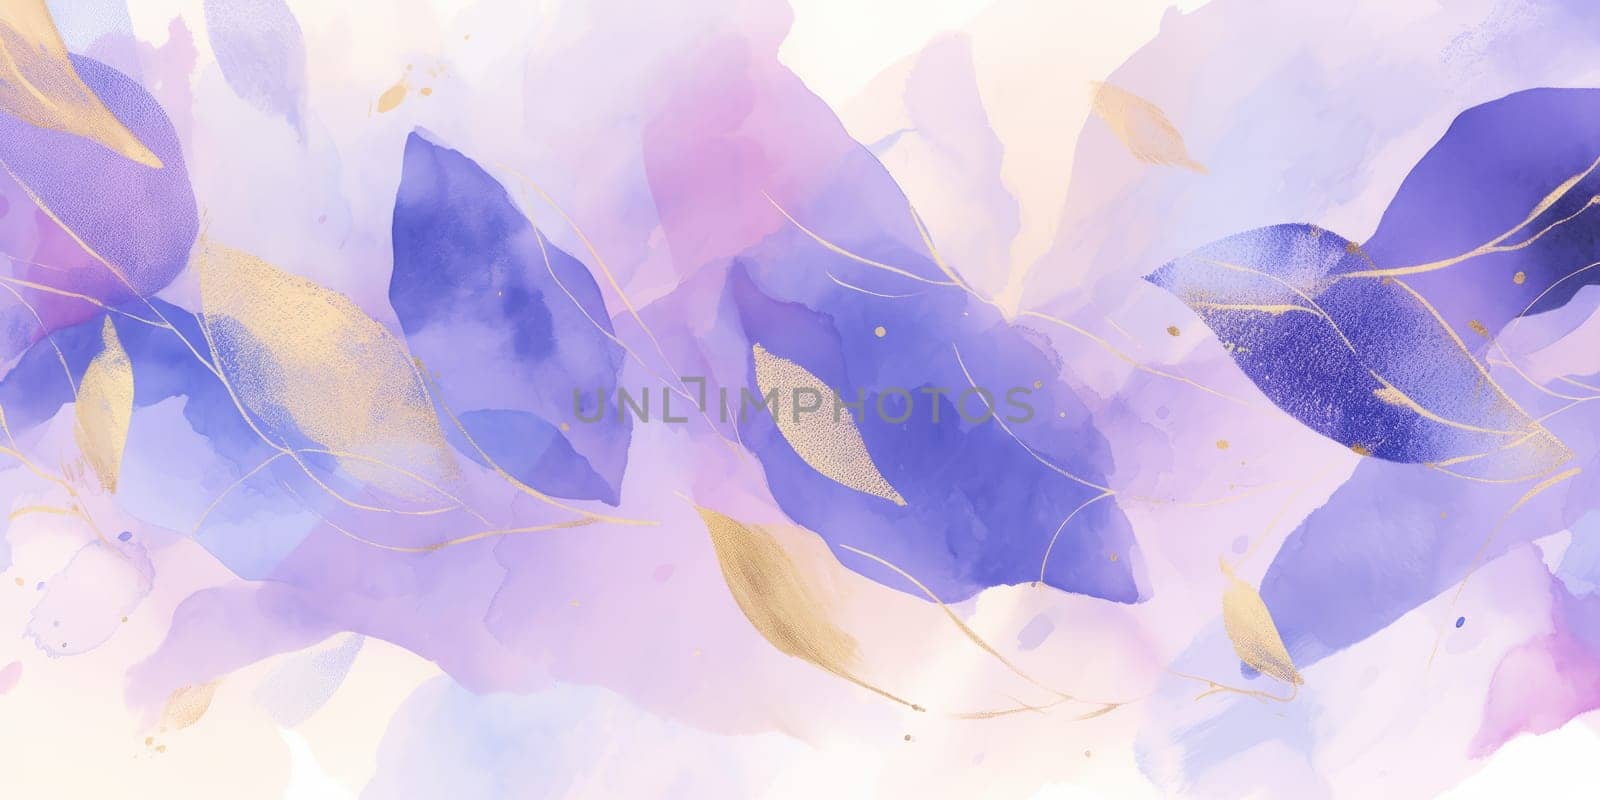 Abstract gold and purple alcohol ink technique background. Luxury fluid art watercolor painting